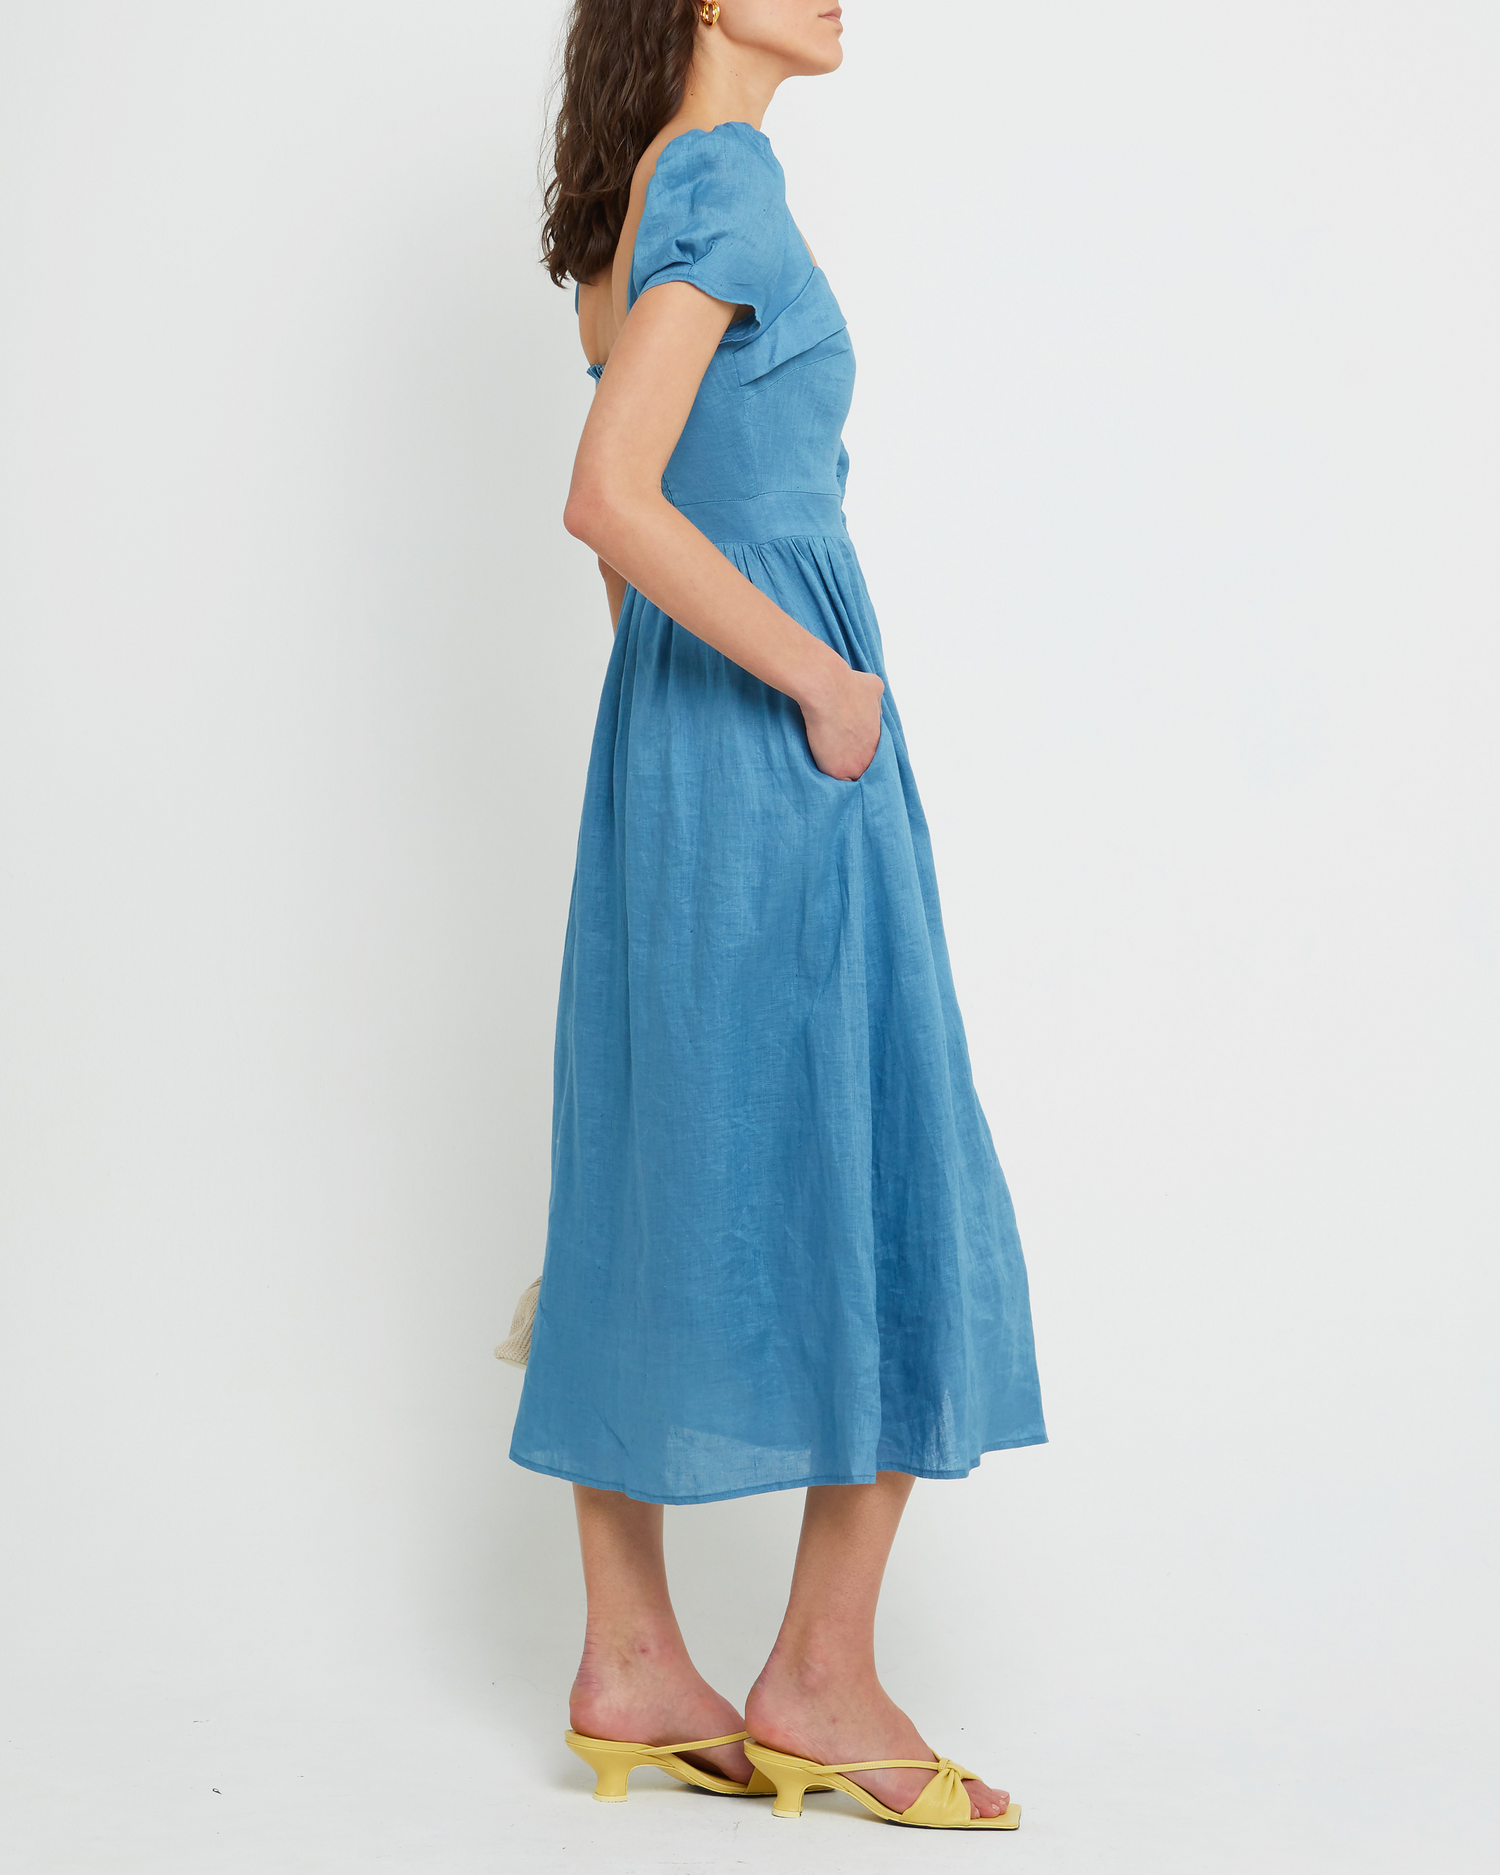 Third image of Ryder Dress, a blue maxi dress, button up, bodice detail, short sleeves, cap sleeves